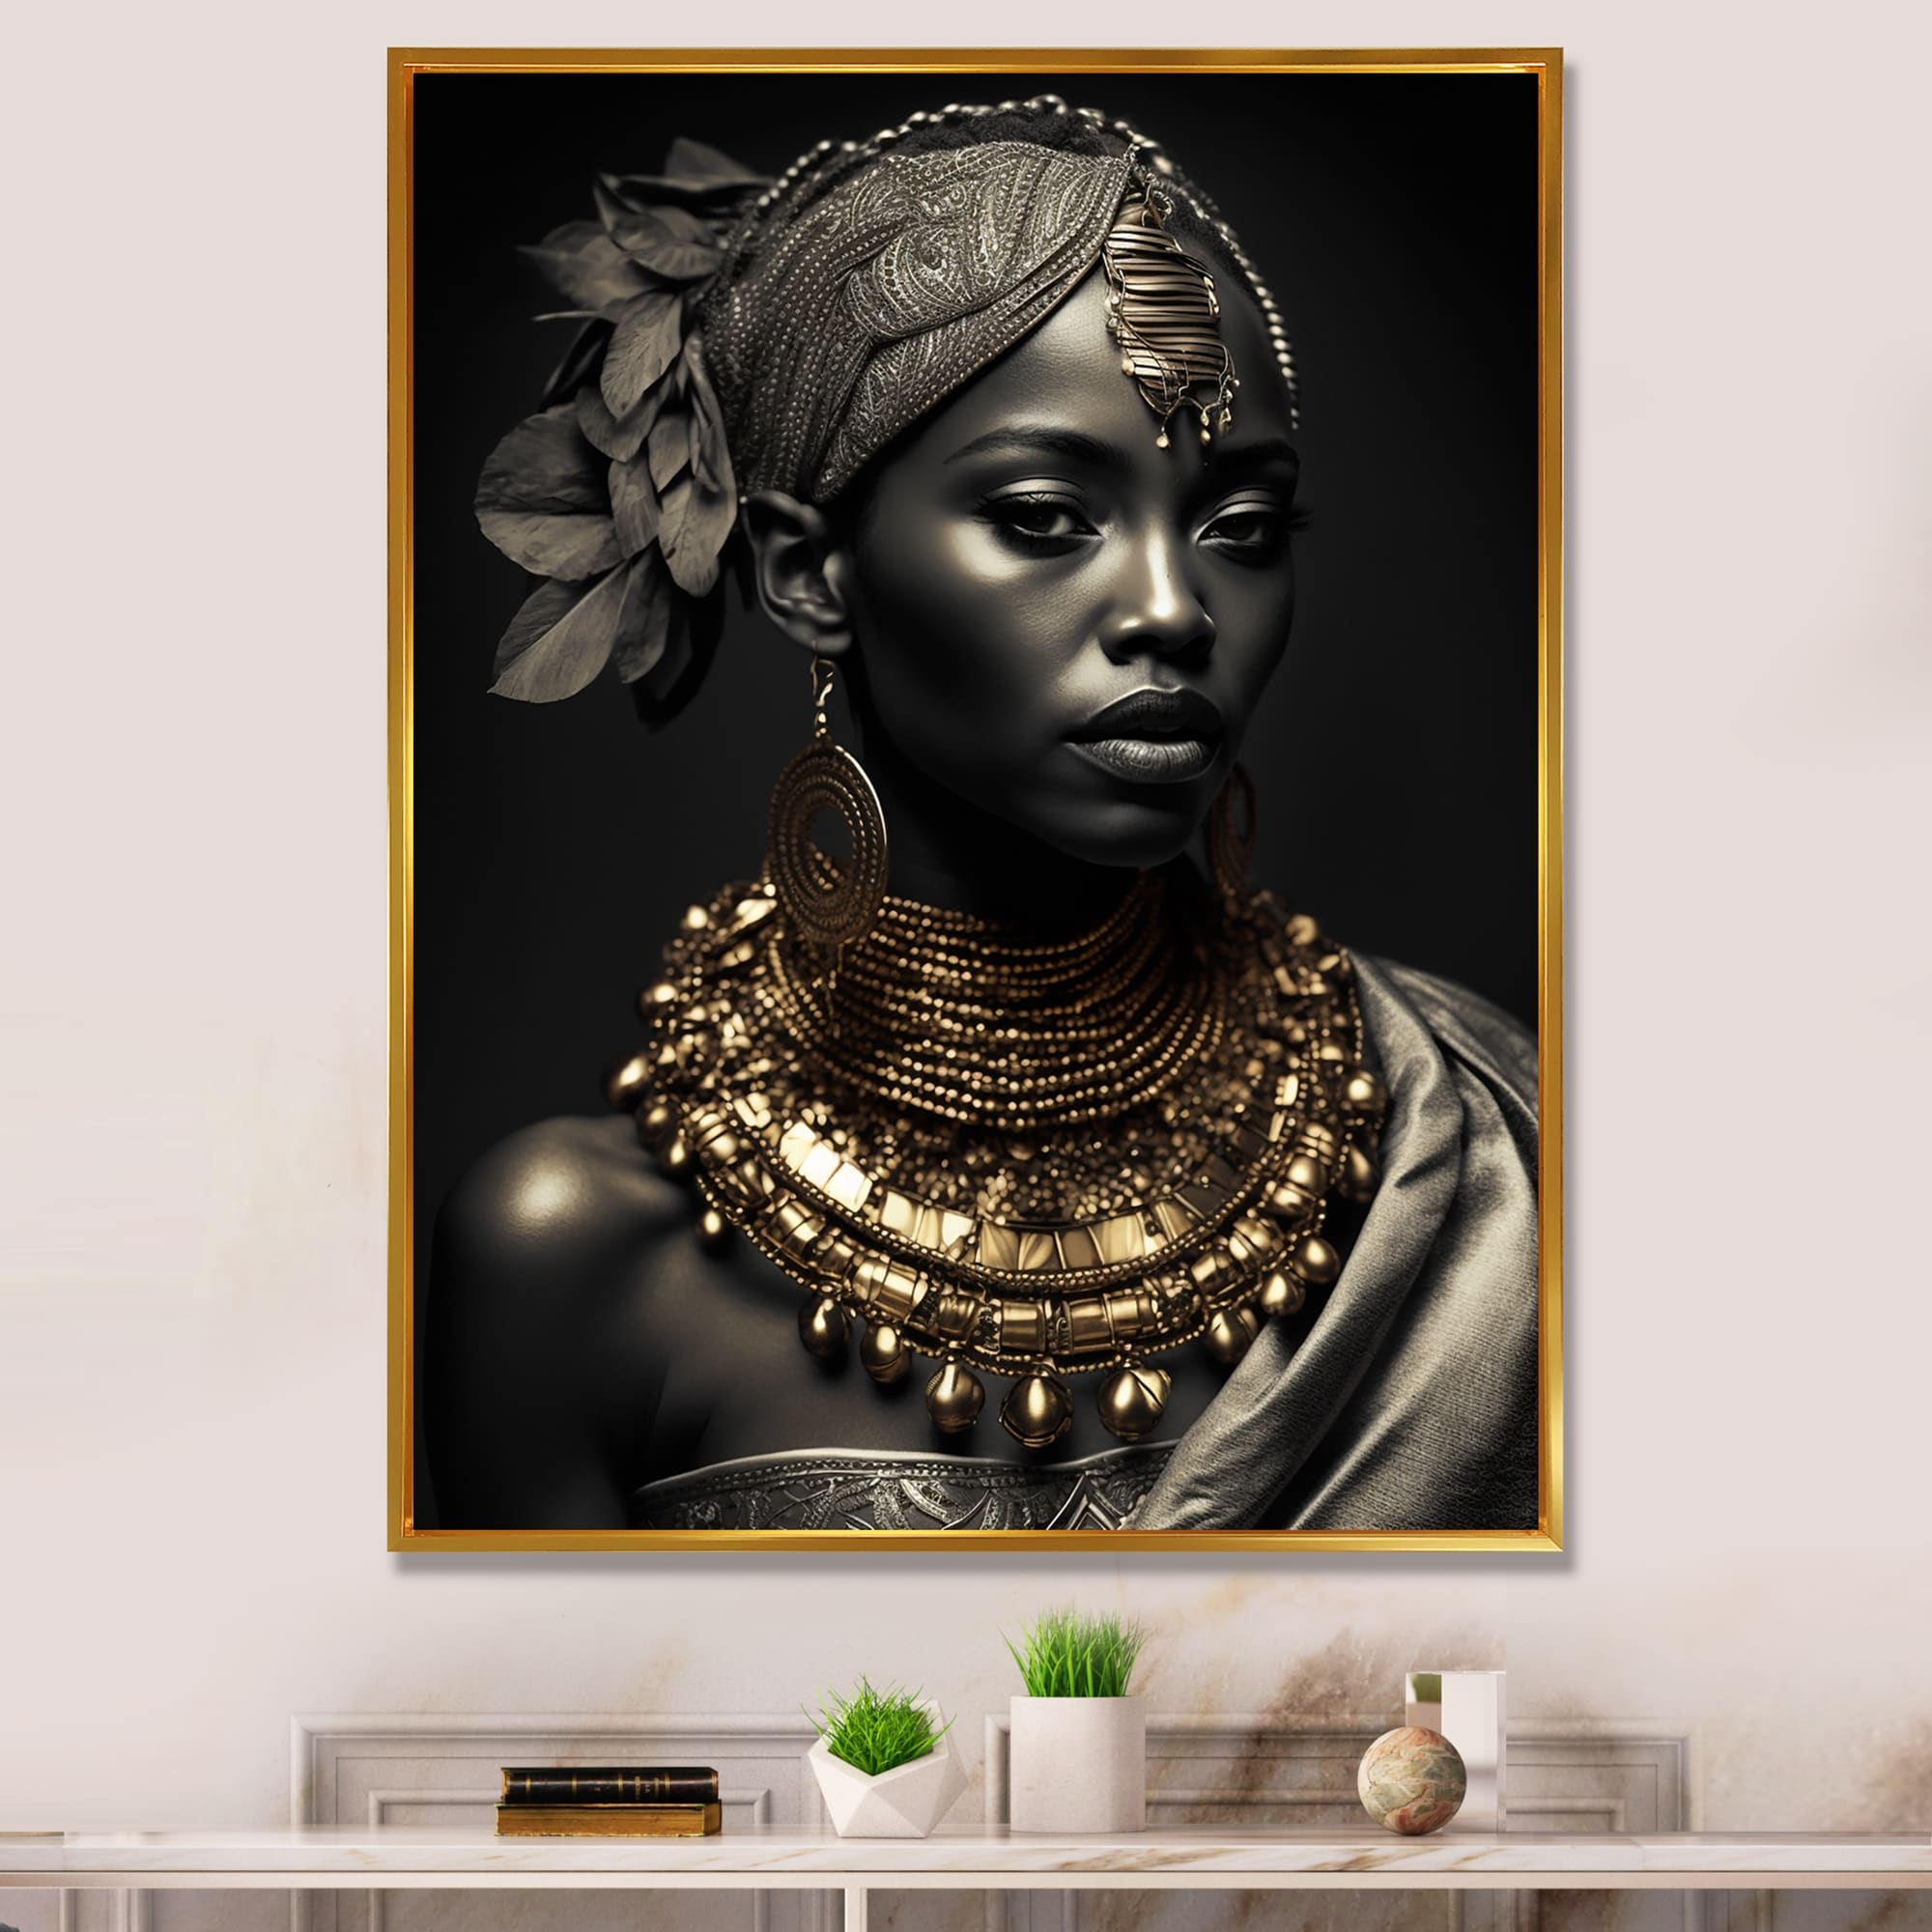 https://ak1.ostkcdn.com/images/products/is/images/direct/6b89ebb84aa583785bfcca3e8d2c3a1623d62adc/Designart-%22African-American-Queen-With-Traditional-Jewelry-VI%22-African-American-Woman-Framed-Canvas-Print.jpg